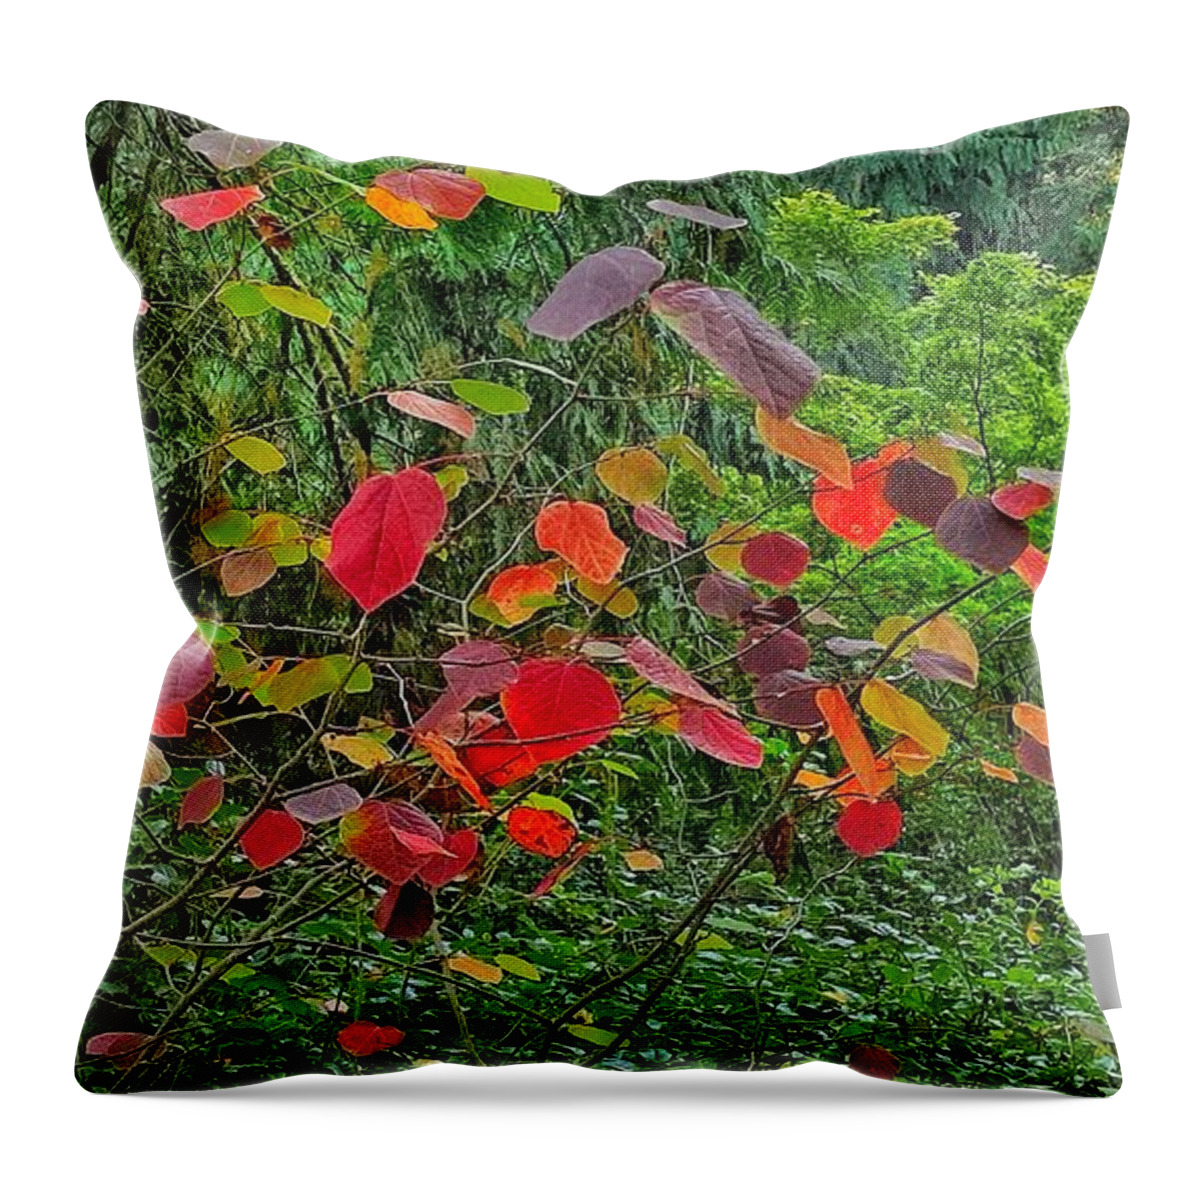 Autumn Throw Pillow featuring the photograph Colorful Fall Leaves by Jerry Abbott